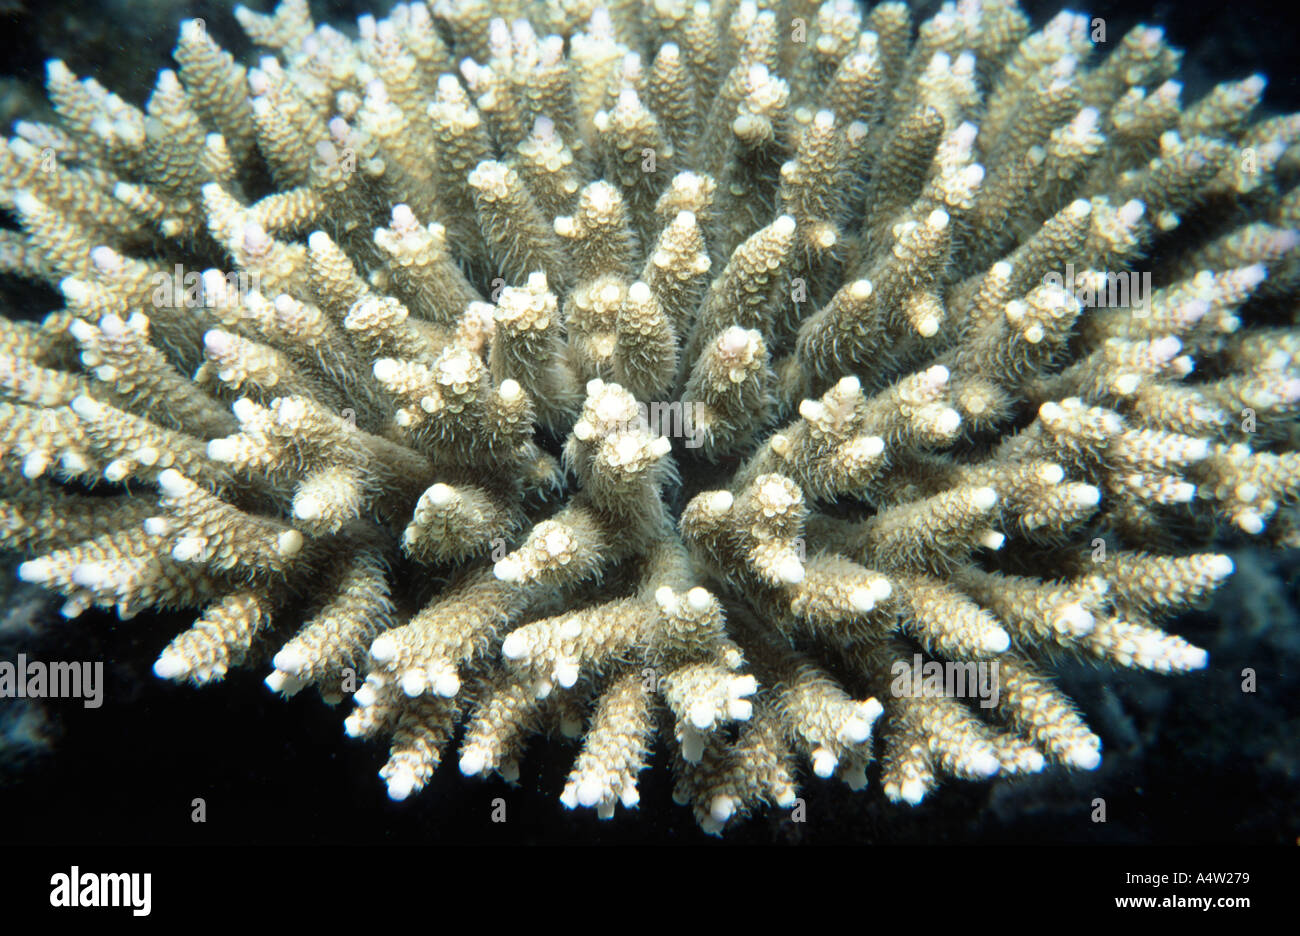 Staghorn coral in closeup growing on a coral reef in The Maldives, Indian Ocean Stock Photo